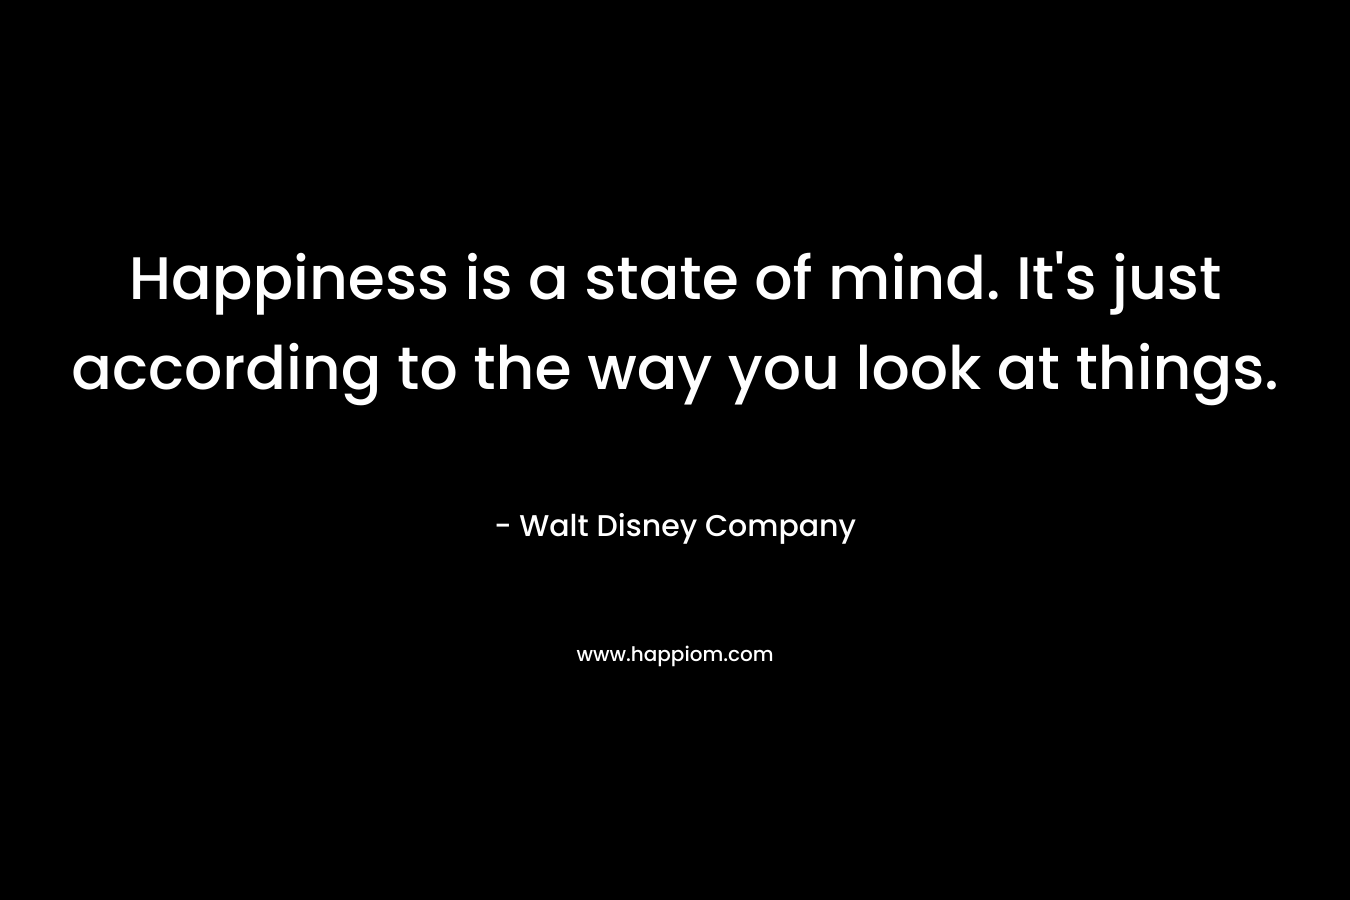 Happiness is a state of mind. It’s just according to the way you look at things. – Walt Disney Company